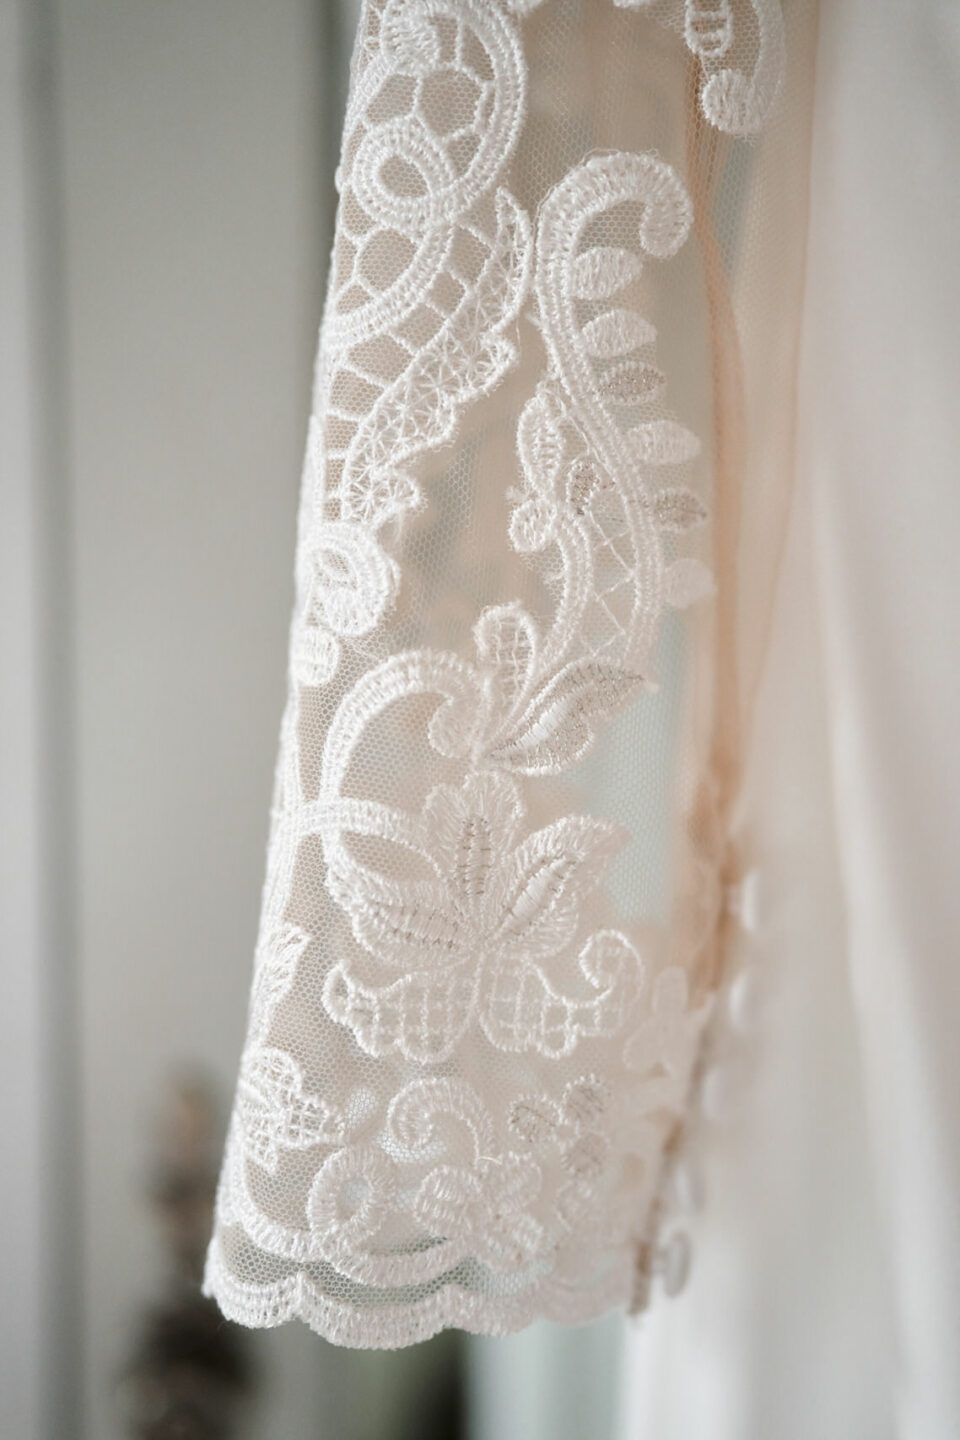 A detailed view of a white lace wedding dress.